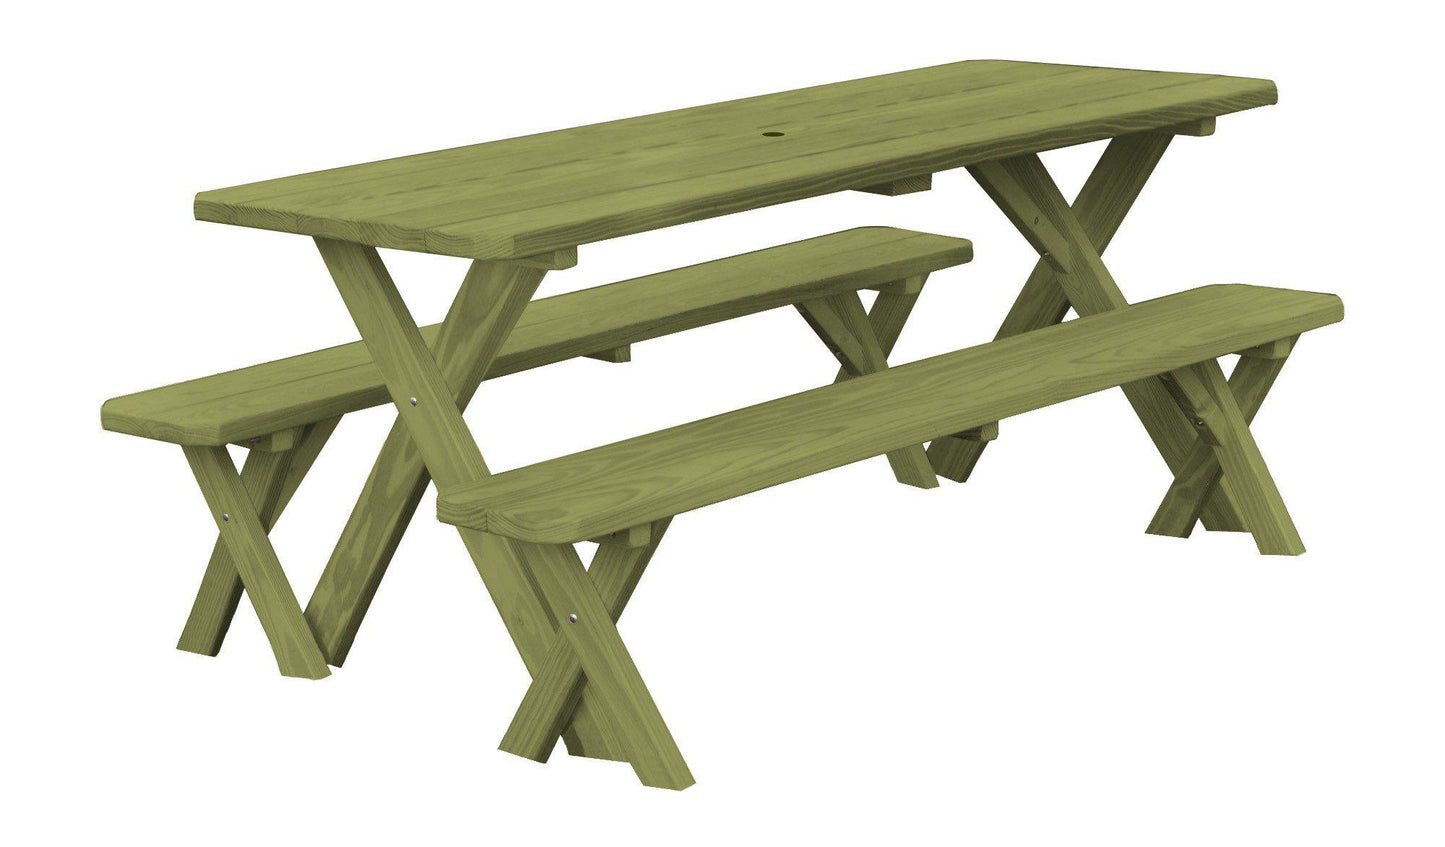 A&L Furniture Co. Yellow Pine 8' Cross-leg Table w/2 Benches - Umbrella Hole - LEAD TIME TO SHIP 10 BUSINESS DAYS